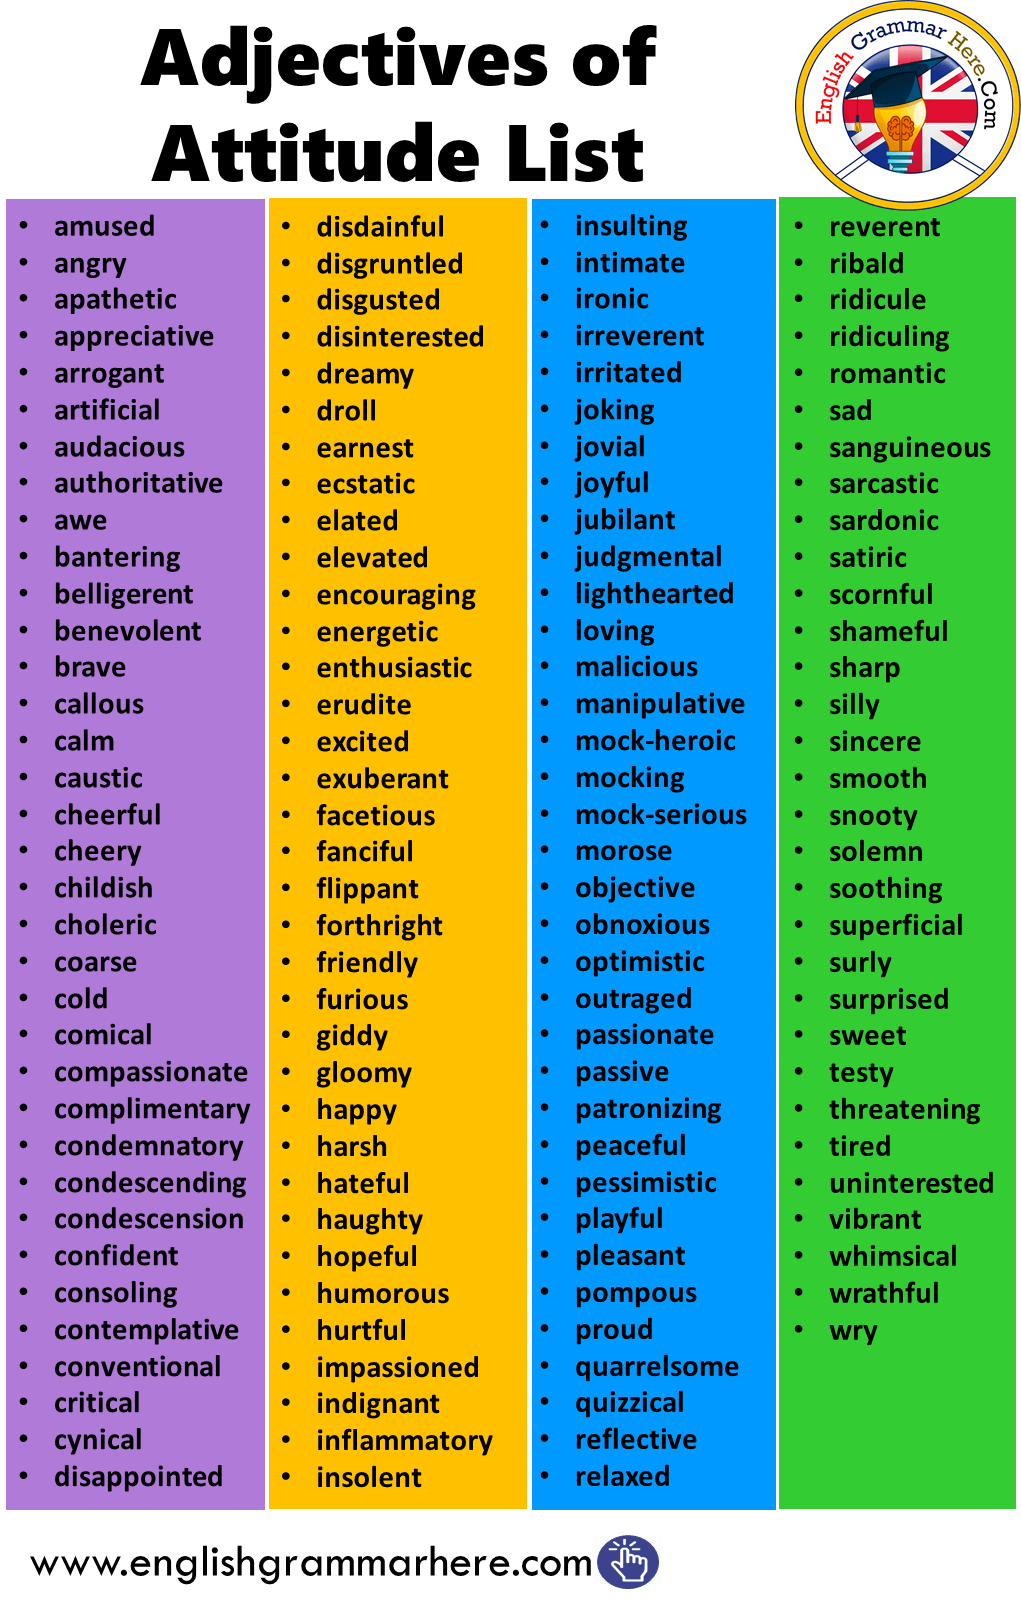 500 Adjectives in English - Common Adjectives - English Grammar Here